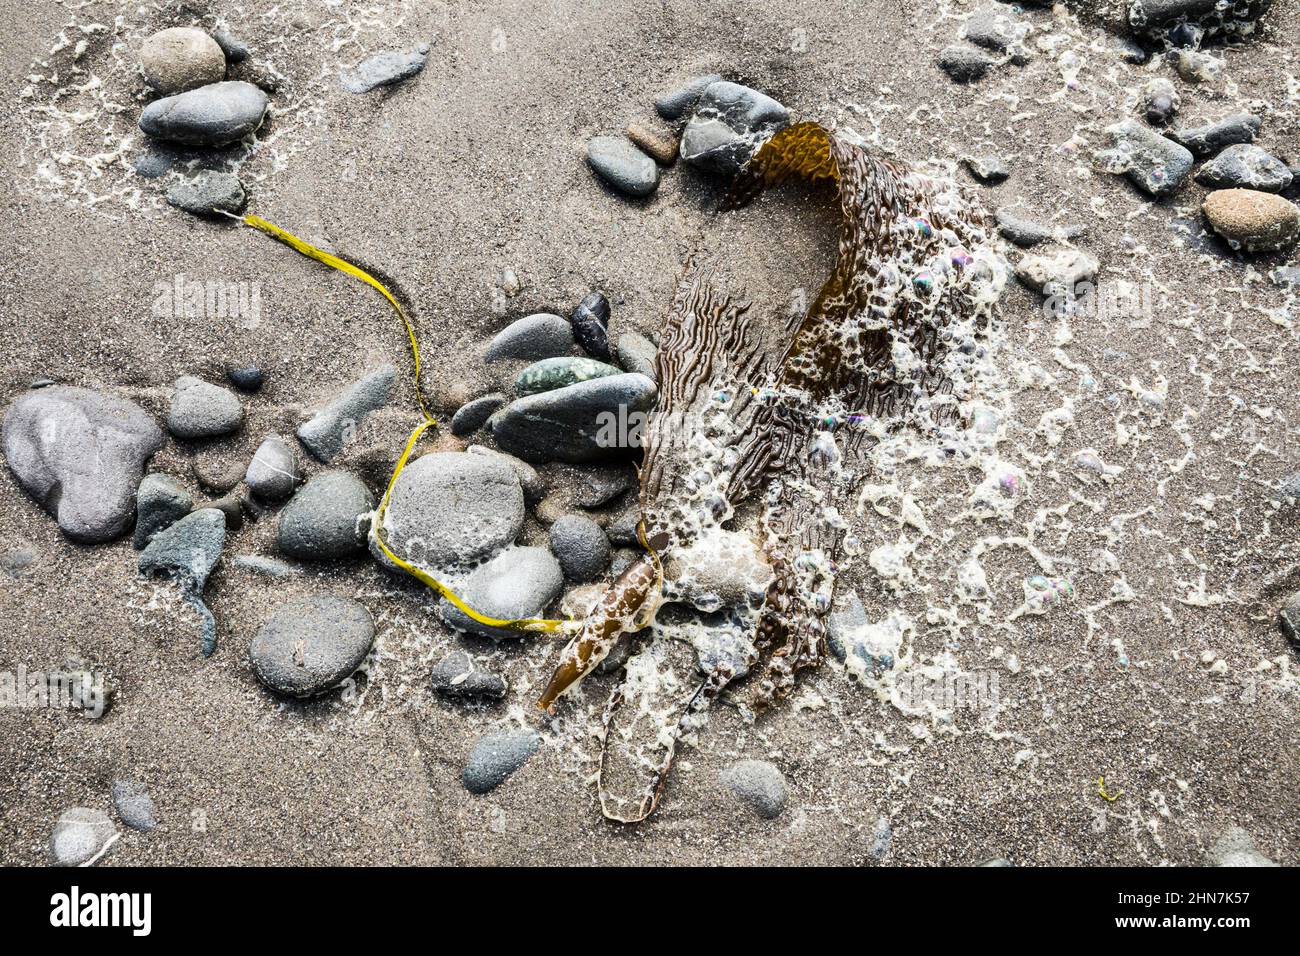 Rocks, sand, and kelp washed up from the ocean on Mosquito Creek beach, Washington Olympic coast. USA Stock Photo